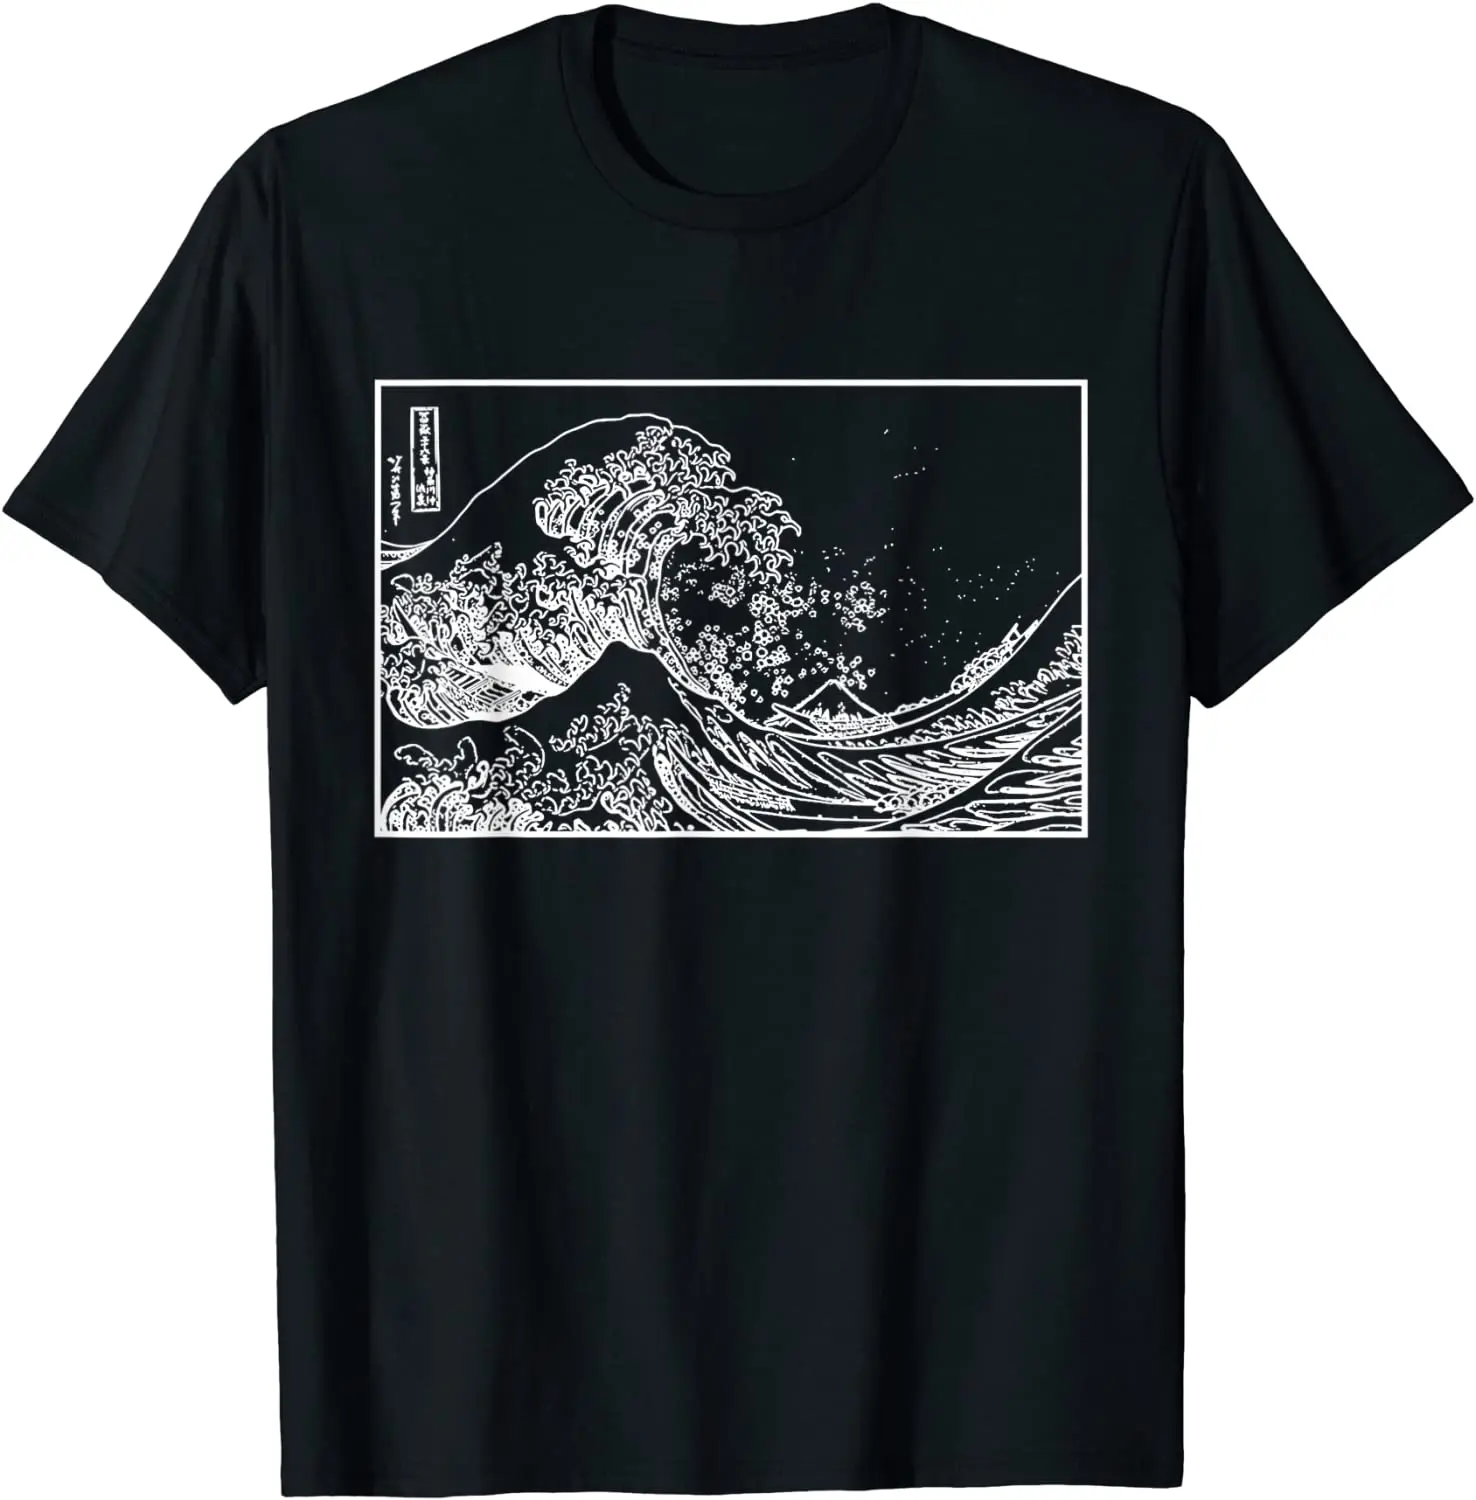 The Great Wave Off Kanagawa - Japanese Vintage Art T-Shirt Novelty Purified Cotton Cute Tees Streetwear for Unisex Gifts